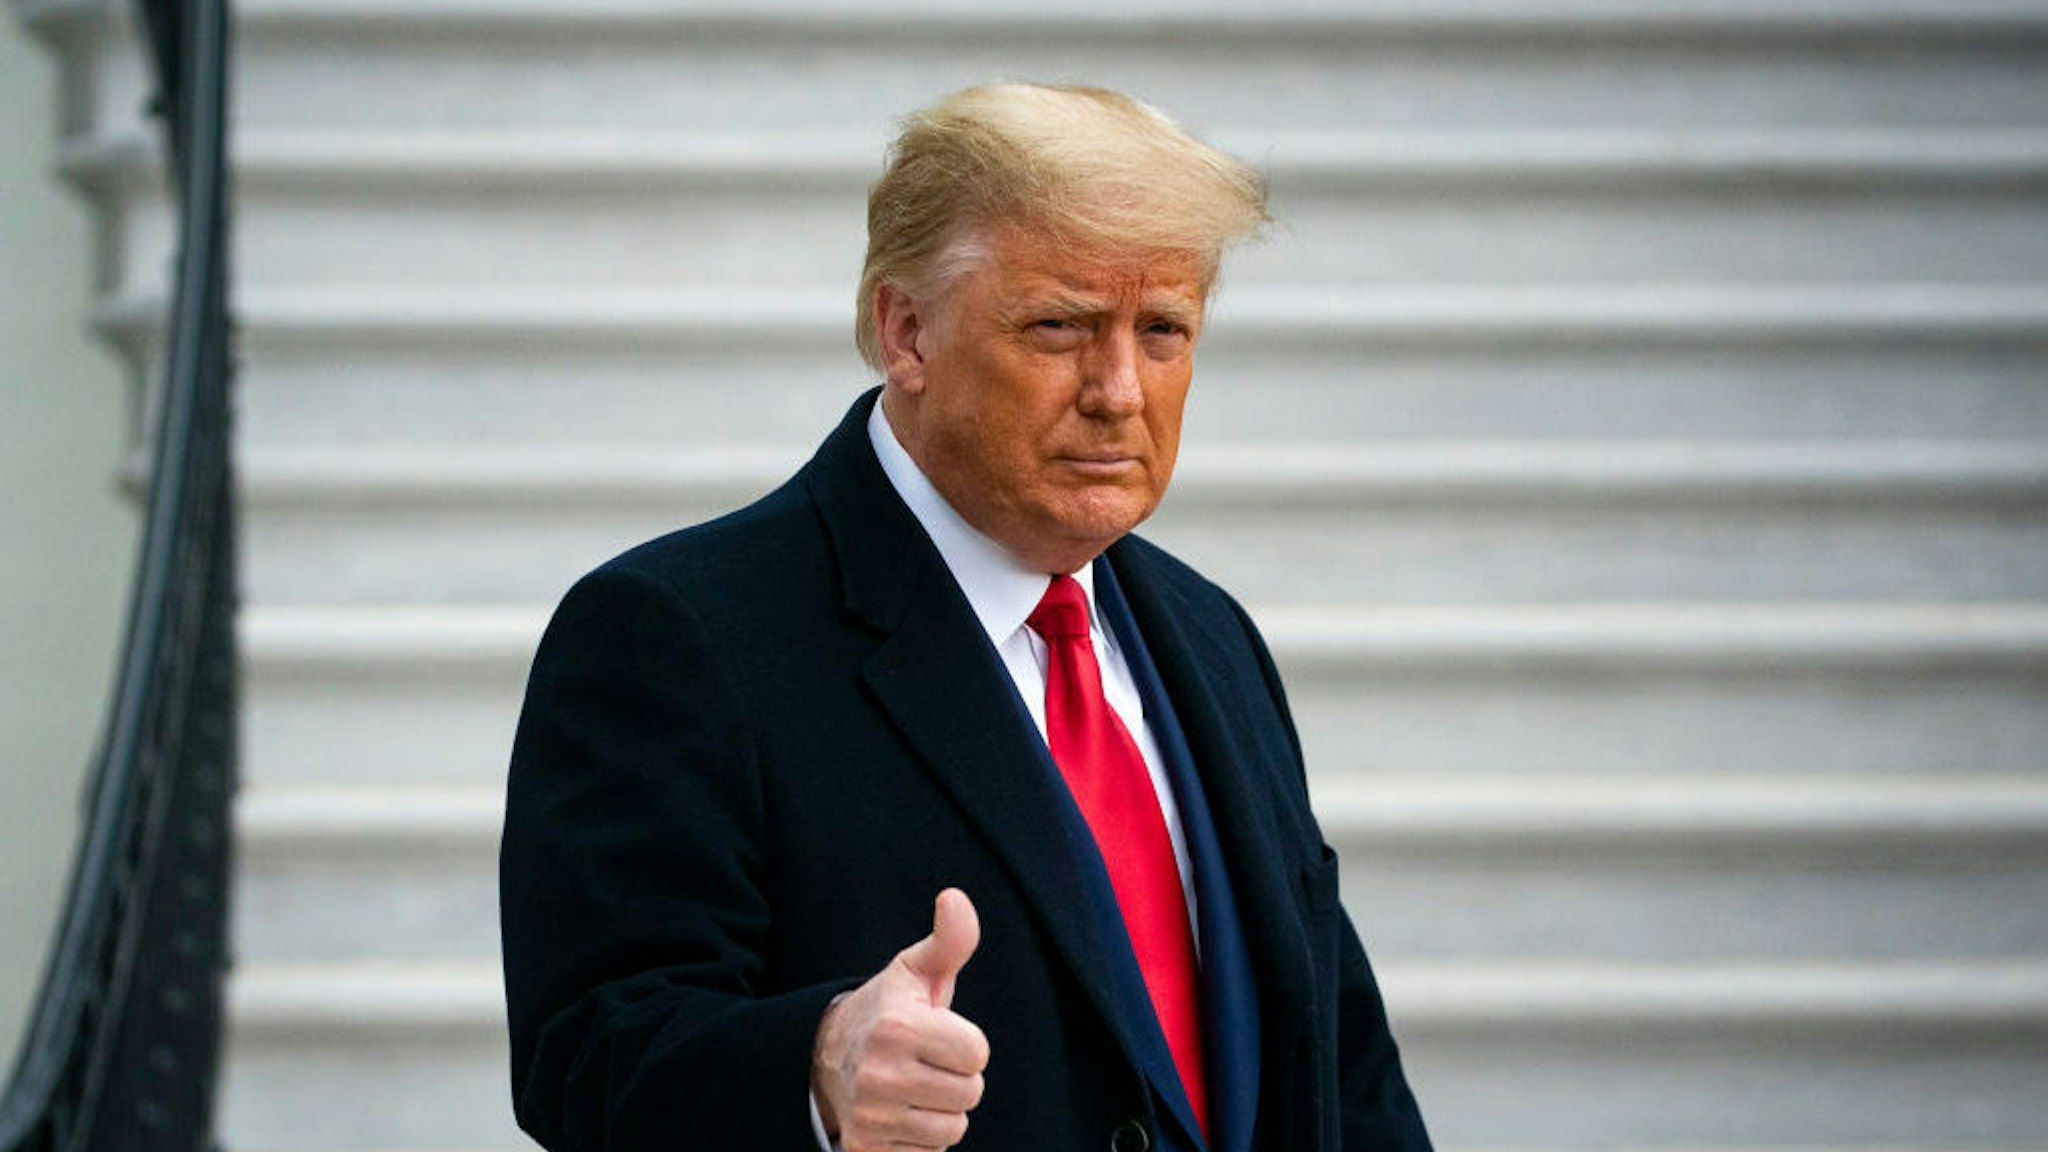 WASHINGTON, DC - DECEMBER 12: U.S. President Donald Trump gives a thumbs up as he departs on the South Lawn of the White House, on December 12, 2020 in Washington, DC. Trump is traveling to the Army versus Navy Football Game at the United States Military Academy in West Point, NY. (Photo by Al Drago/Getty Images)